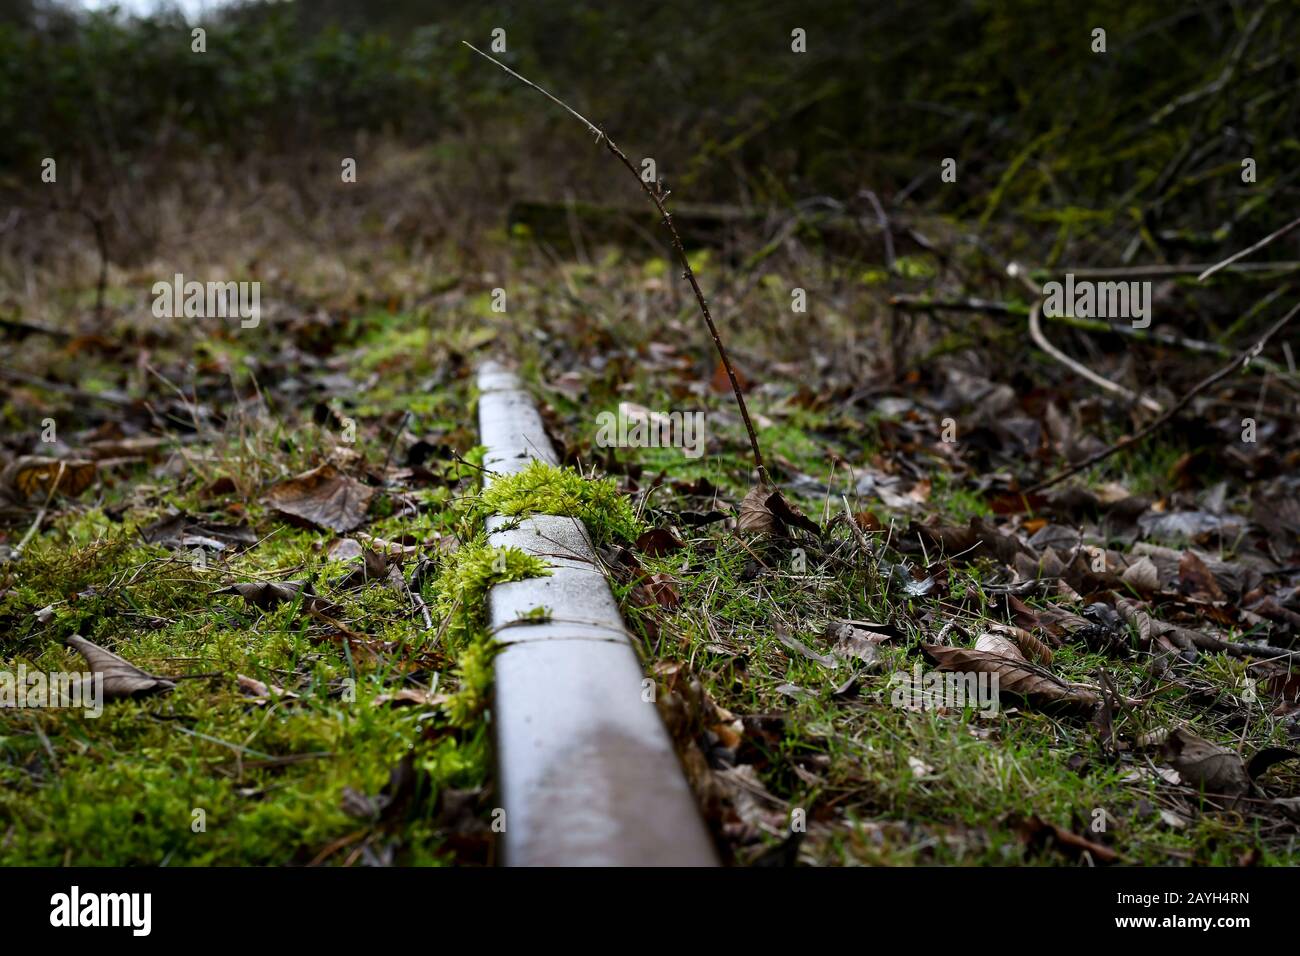 parts of an old forgotten railway with bits of broken train Stock Photo